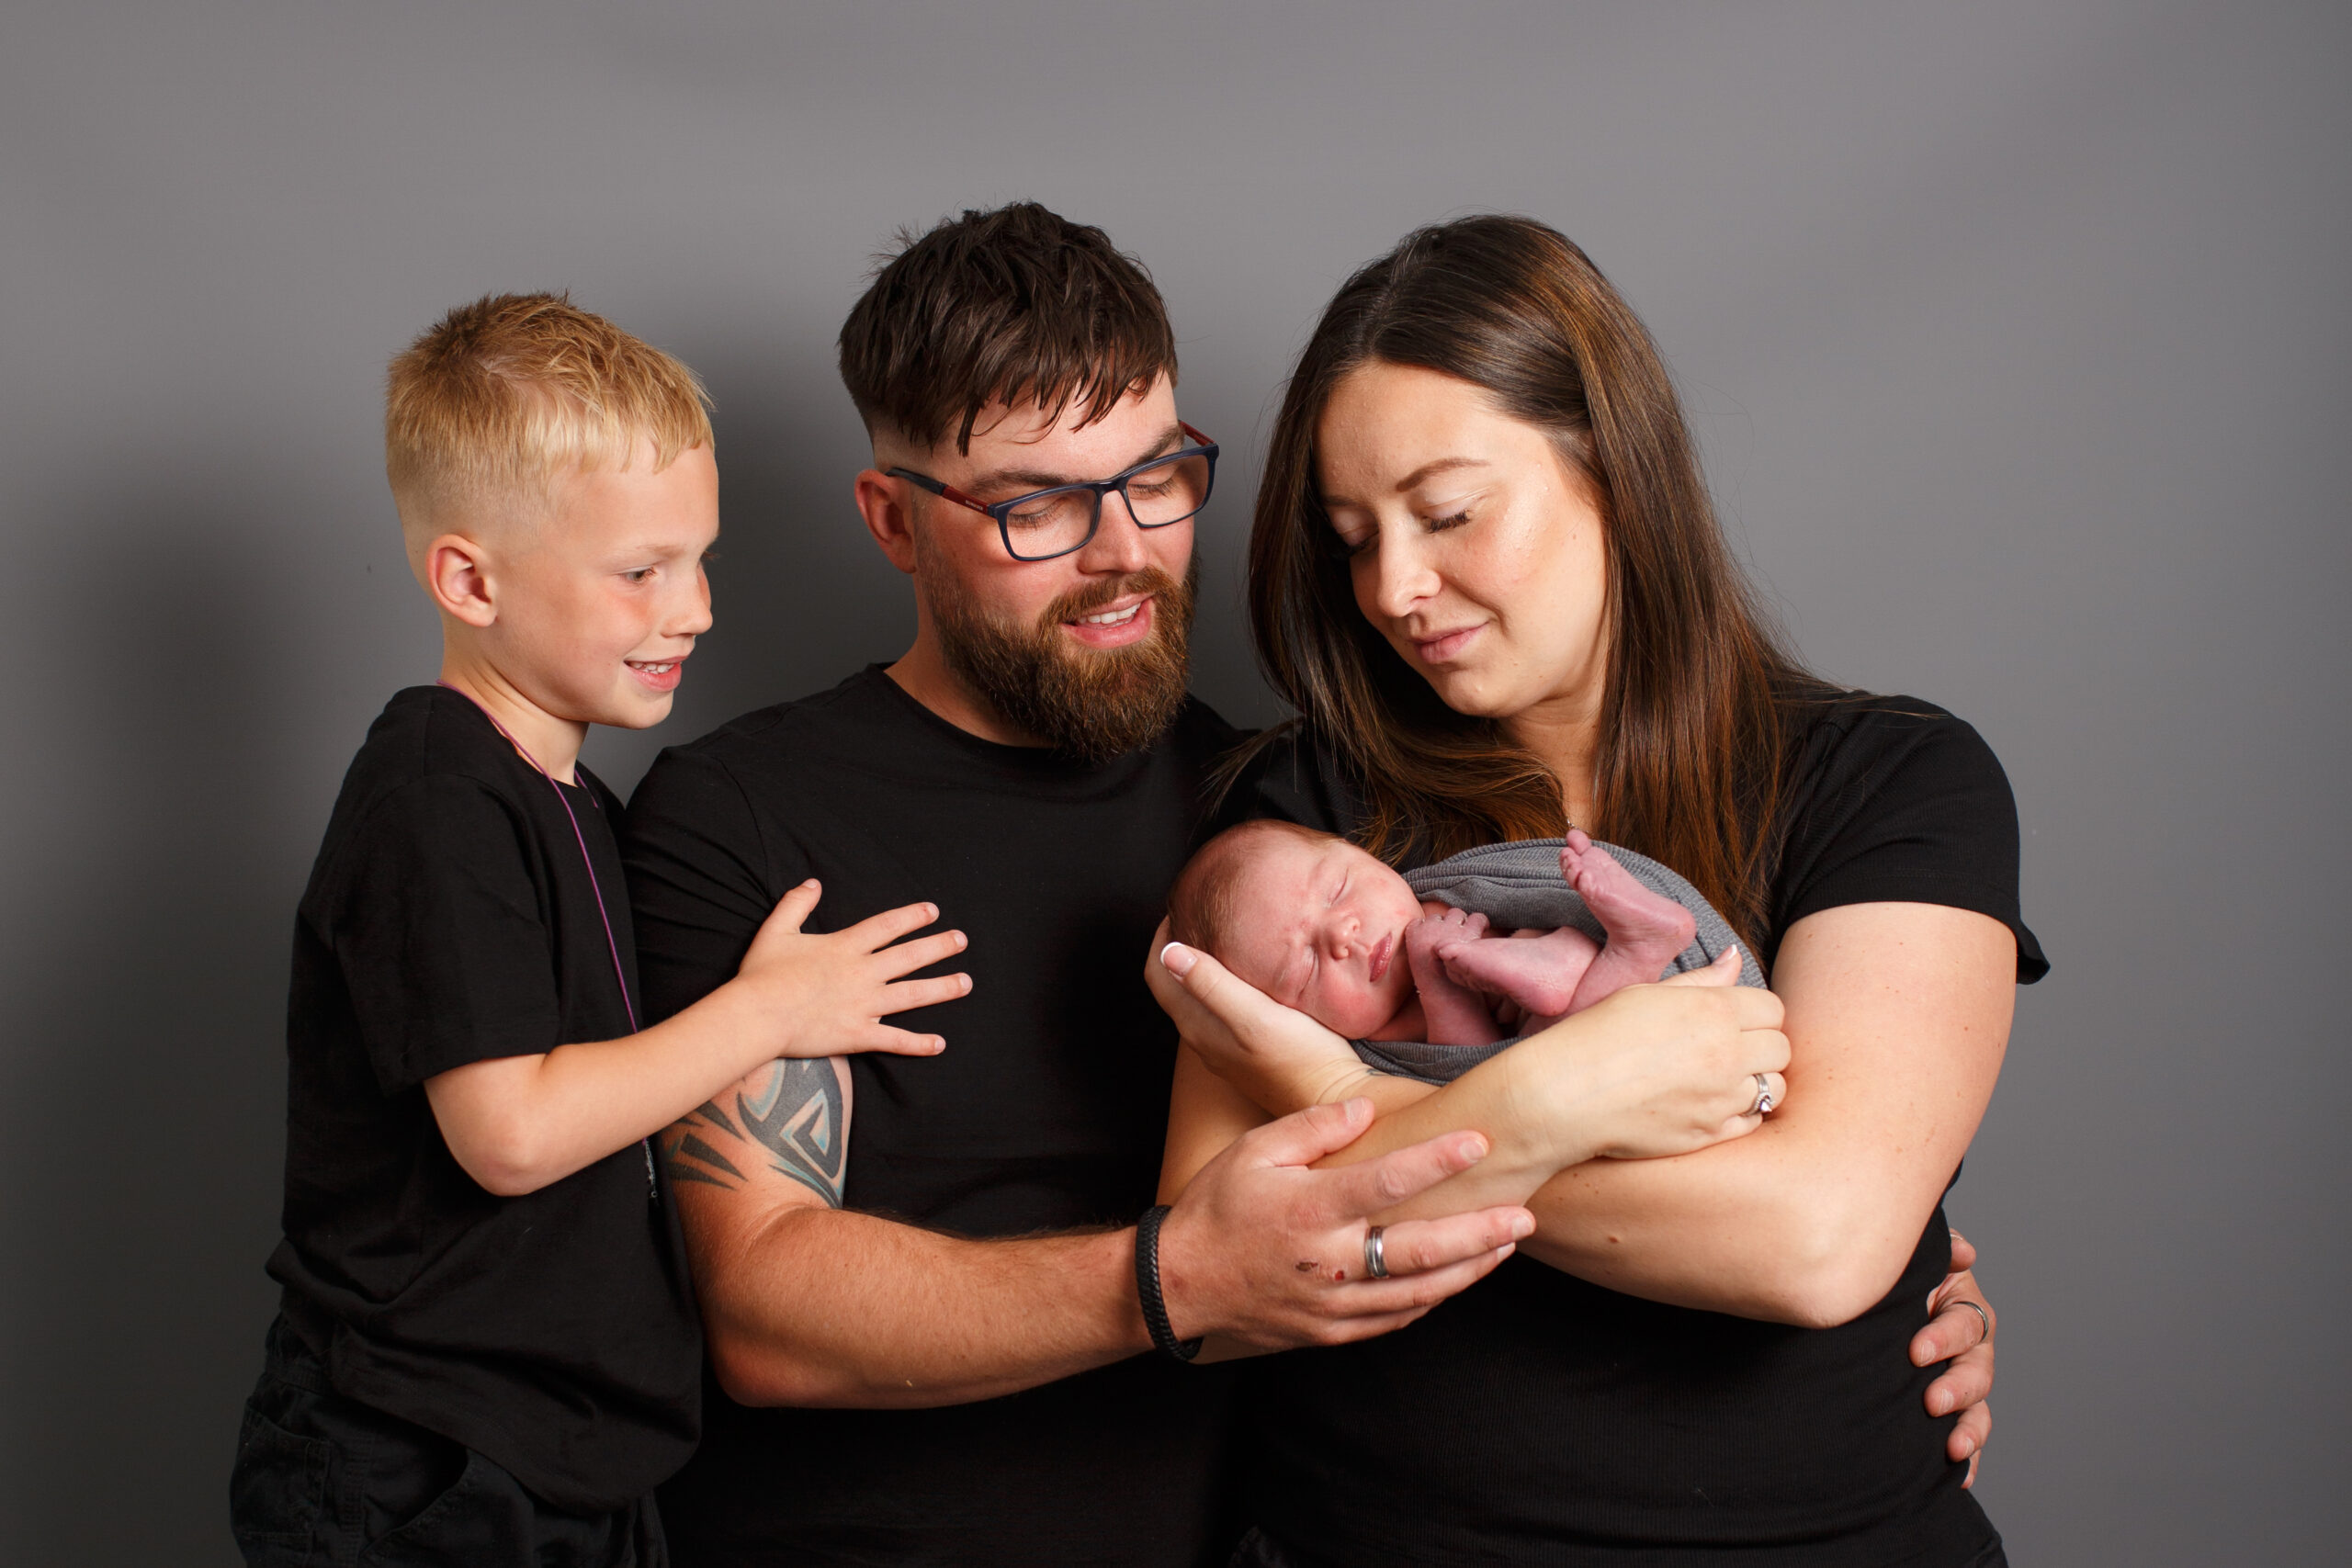 newborn and family photography in horsham and west sussex